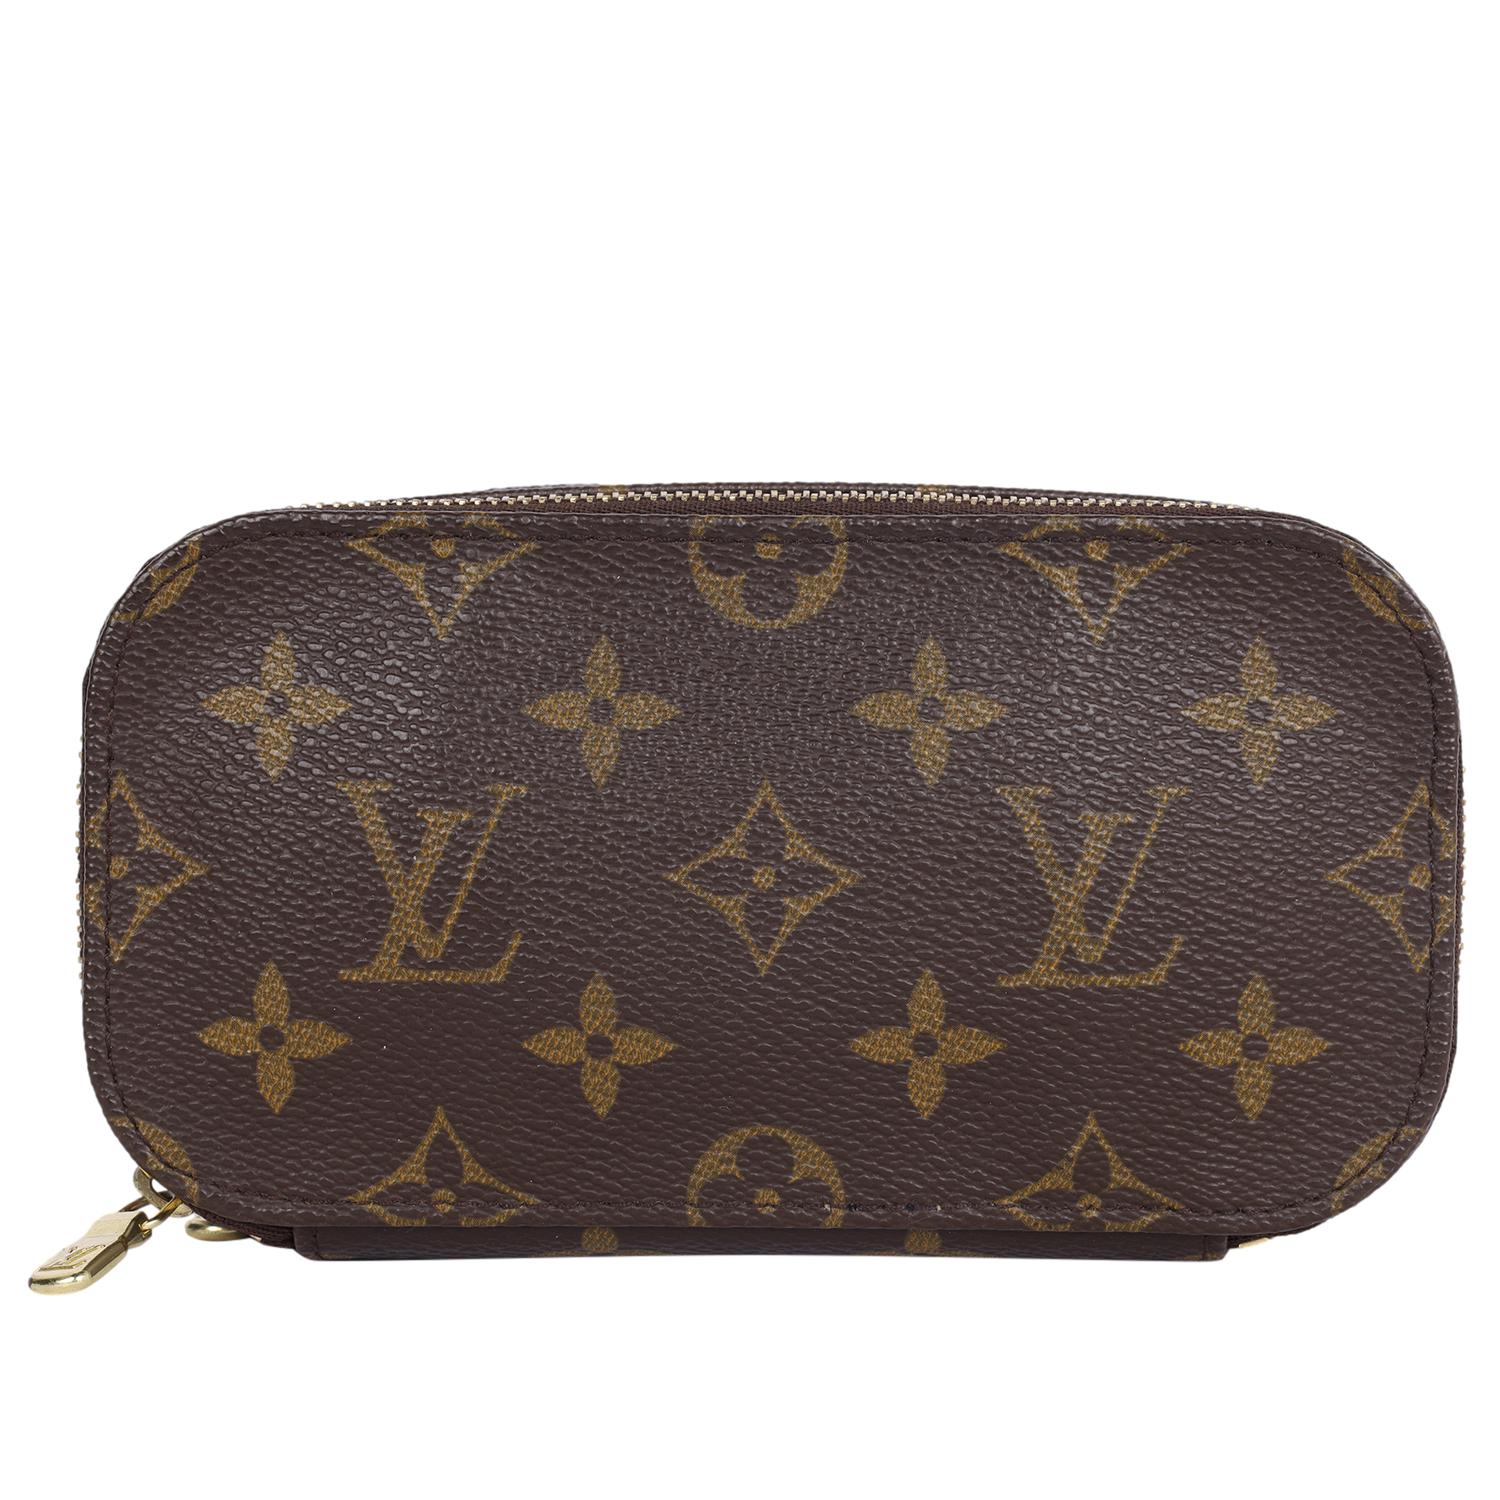 Authentic Louis Vuitton brown monogram Trousse blush PM cosmetic case. Features monogram canvas with 2 zipper sides, one with 3 stretch bands, a stretch side pocket and the other zippered side includes 4 rounded stretch bands. Great case to organize